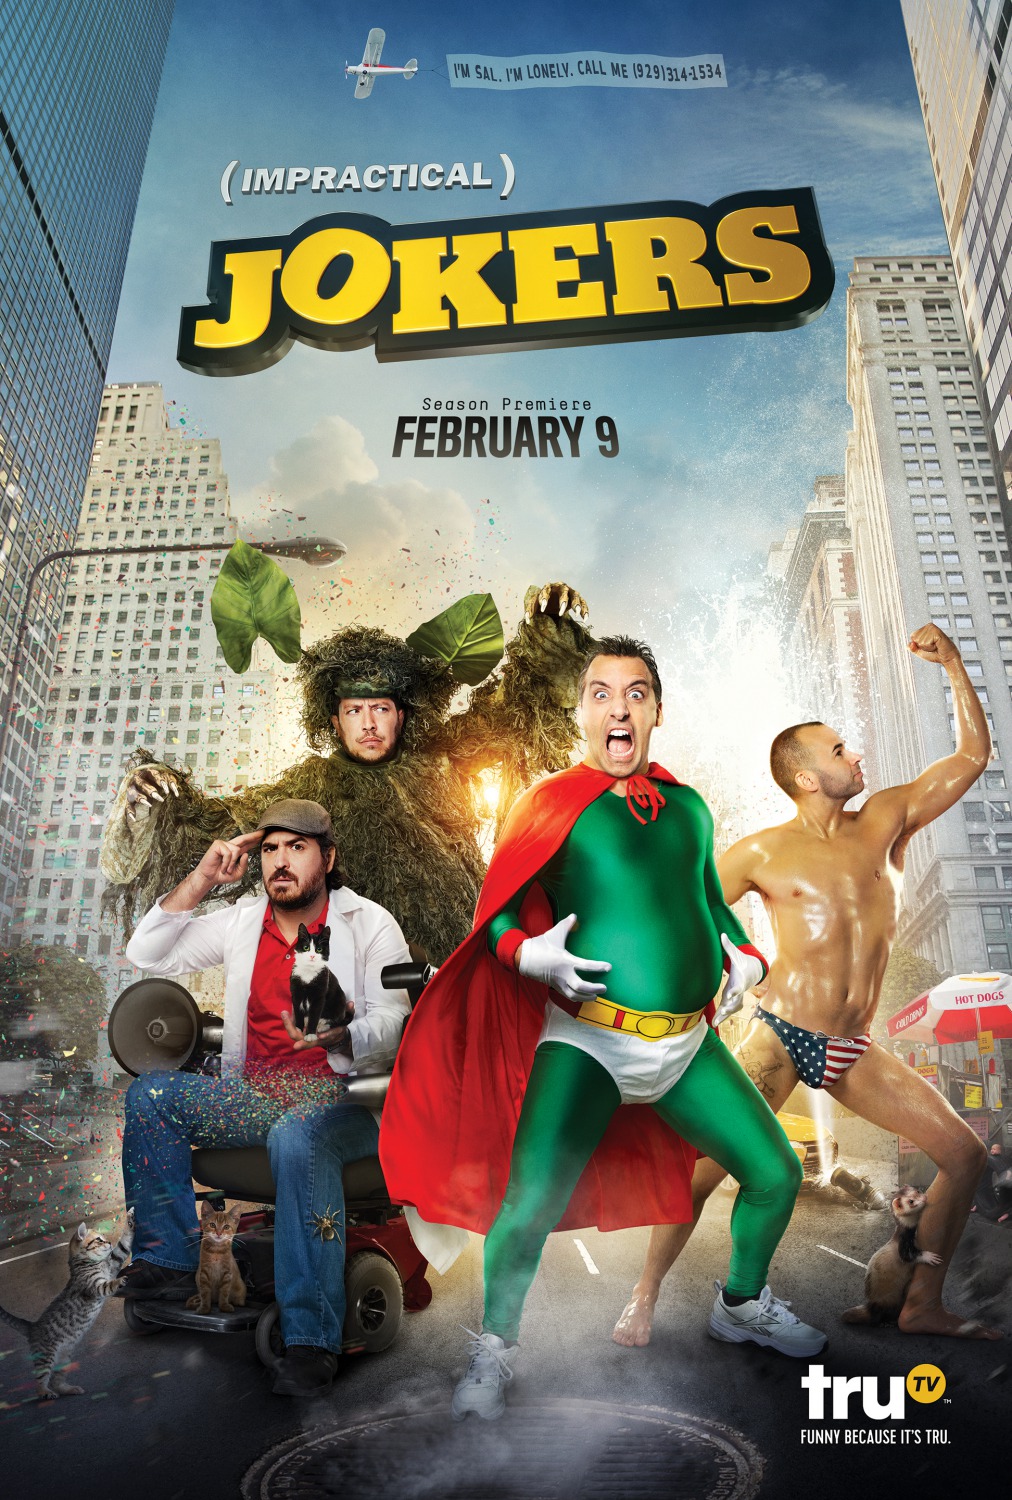 Extra Large Movie Poster Image for Impractical Jokers (#7 of 8)